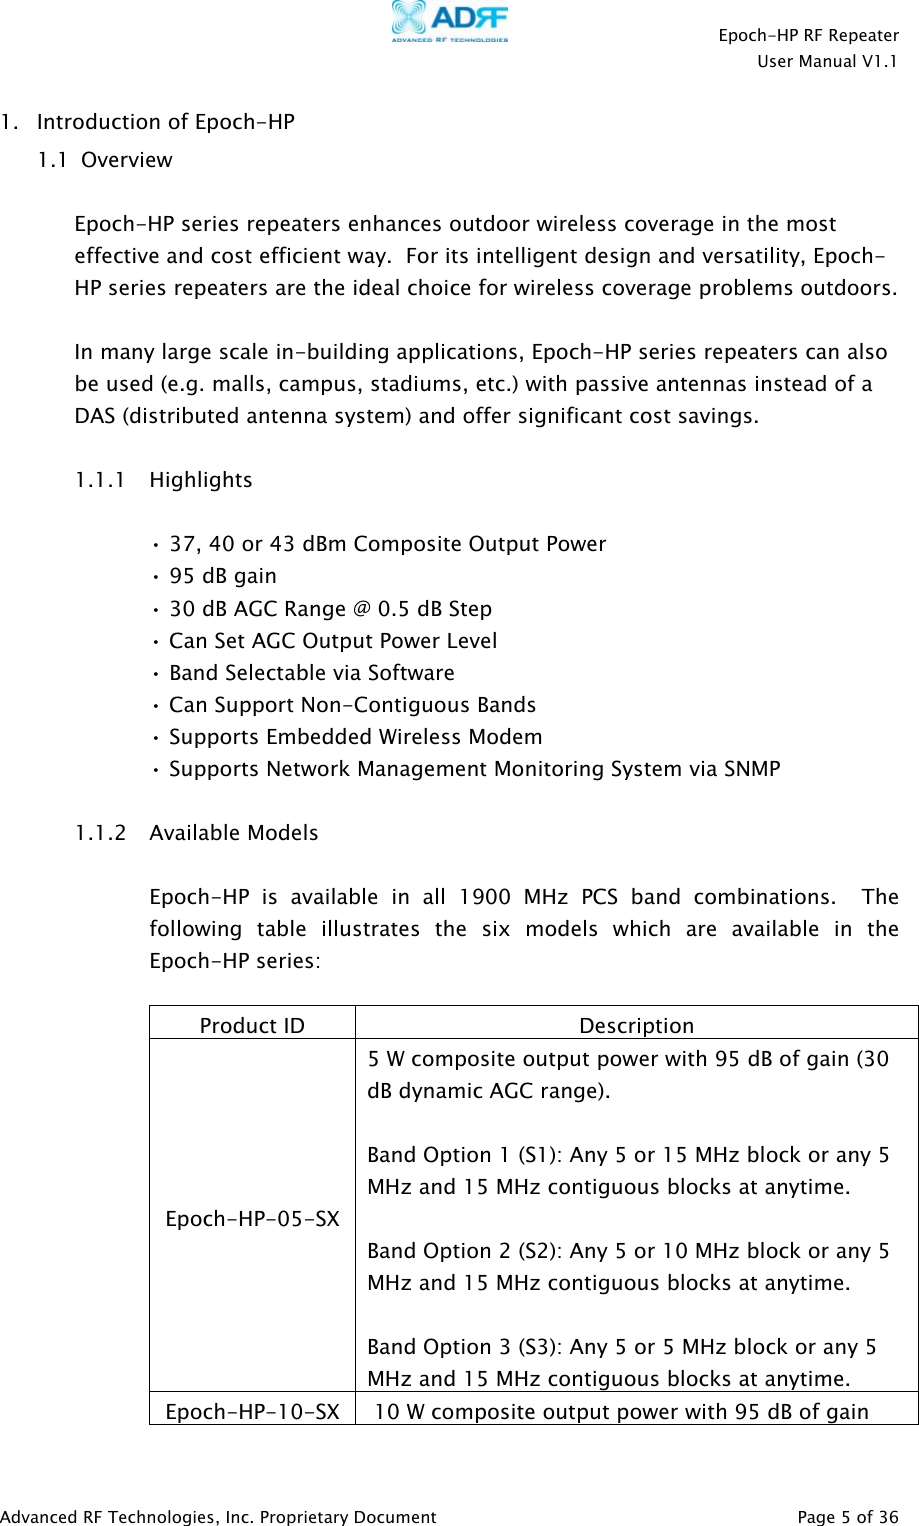    Epoch-HP RF Repeater  User Manual V1.1  Advanced RF Technologies, Inc. Proprietary Document   Page 5 of 36  1. Introduction of Epoch-HP  1.1  Overview  Epoch-HP series repeaters enhances outdoor wireless coverage in the most effective and cost efficient way.  For its intelligent design and versatility, Epoch-HP series repeaters are the ideal choice for wireless coverage problems outdoors.   In many large scale in-building applications, Epoch-HP series repeaters can also be used (e.g. malls, campus, stadiums, etc.) with passive antennas instead of a DAS (distributed antenna system) and offer significant cost savings.  1.1.1 Highlights  • 37, 40 or 43 dBm Composite Output Power • 95 dB gain • 30 dB AGC Range @ 0.5 dB Step • Can Set AGC Output Power Level  • Band Selectable via Software • Can Support Non-Contiguous Bands • Supports Embedded Wireless Modem • Supports Network Management Monitoring System via SNMP   1.1.2 Available Models  Epoch-HP is available in all 1900 MHz PCS band combinations.  The following table illustrates the six models which are available in the Epoch-HP series:  Product ID  Description Epoch-HP-05-SX 5 W composite output power with 95 dB of gain (30 dB dynamic AGC range).  Band Option 1 (S1): Any 5 or 15 MHz block or any 5 MHz and 15 MHz contiguous blocks at anytime.  Band Option 2 (S2): Any 5 or 10 MHz block or any 5 MHz and 15 MHz contiguous blocks at anytime.  Band Option 3 (S3): Any 5 or 5 MHz block or any 5 MHz and 15 MHz contiguous blocks at anytime. Epoch-HP-10-SX   10 W composite output power with 95 dB of gain 